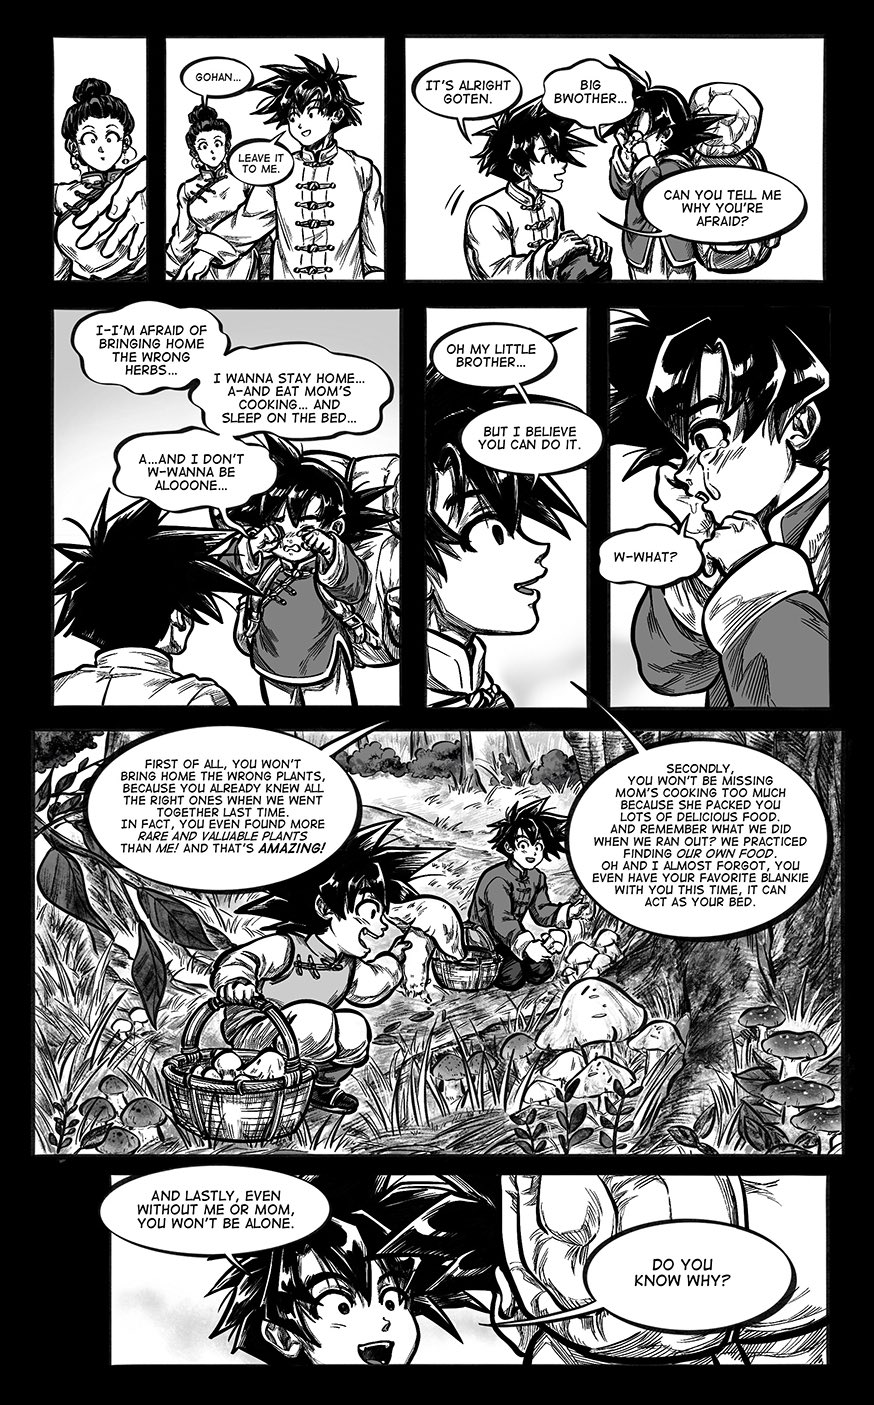 Two giants face-to-face. - Chapter 5, Page 104 - DBMultiverse